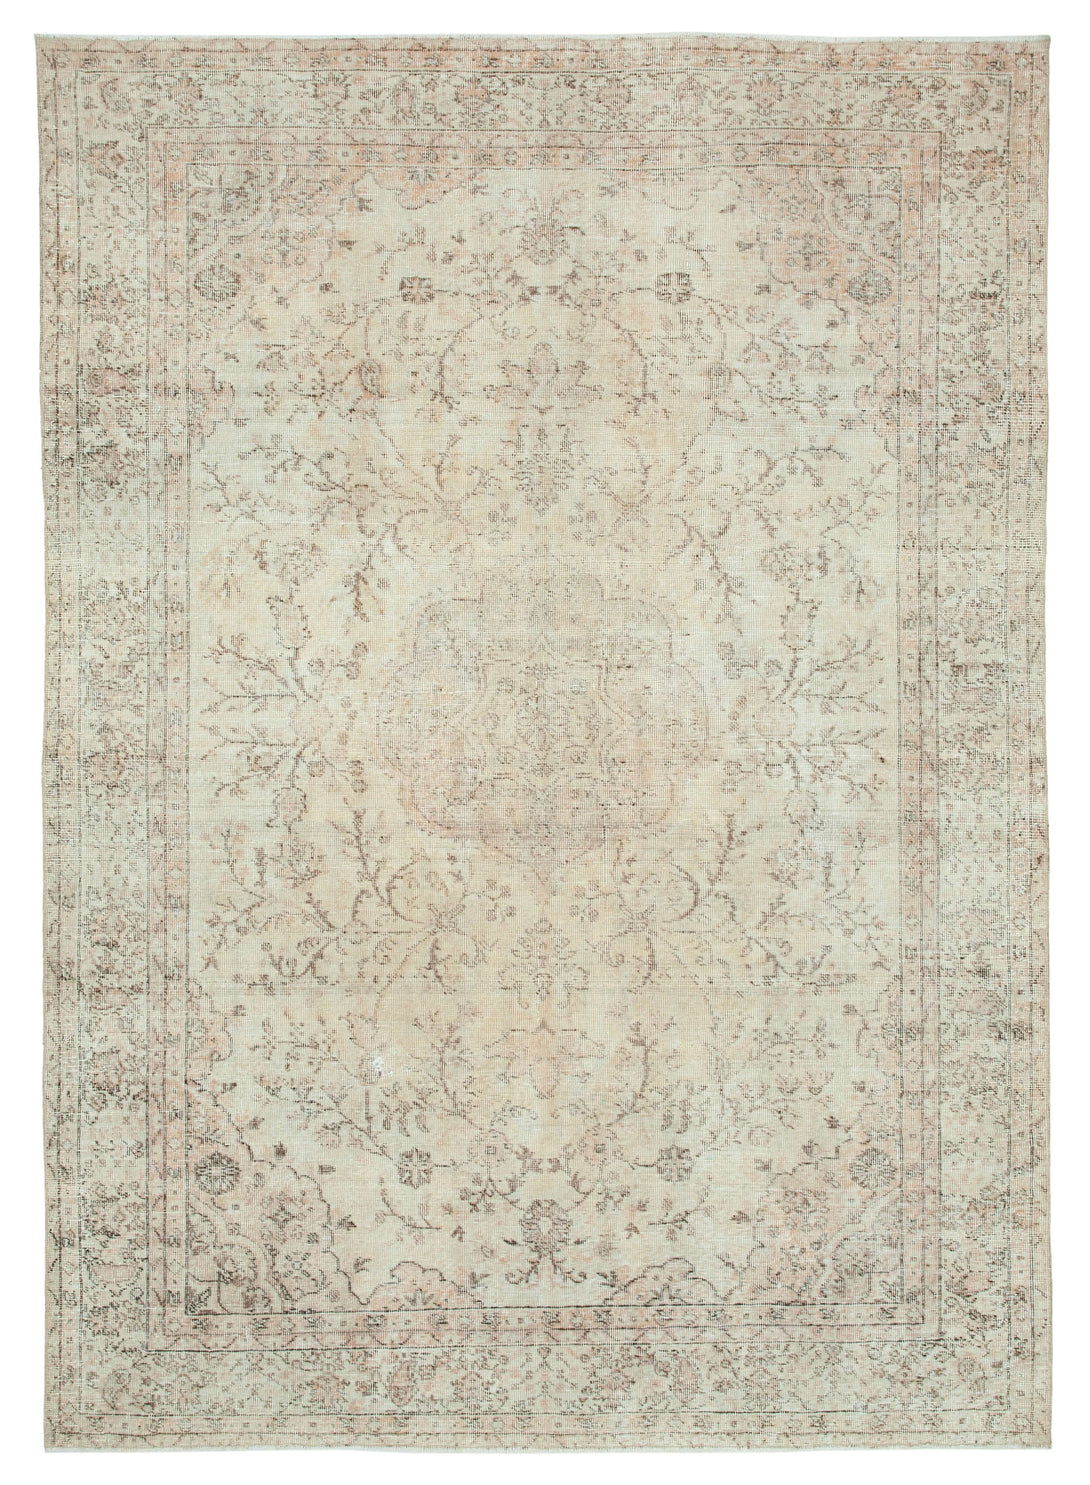 Handmade White Wash Area Rug > Design# OL-AC-25185 > Size: 6'-10" x 9'-7", Carpet Culture Rugs, Handmade Rugs, NYC Rugs, New Rugs, Shop Rugs, Rug Store, Outlet Rugs, SoHo Rugs, Rugs in USA